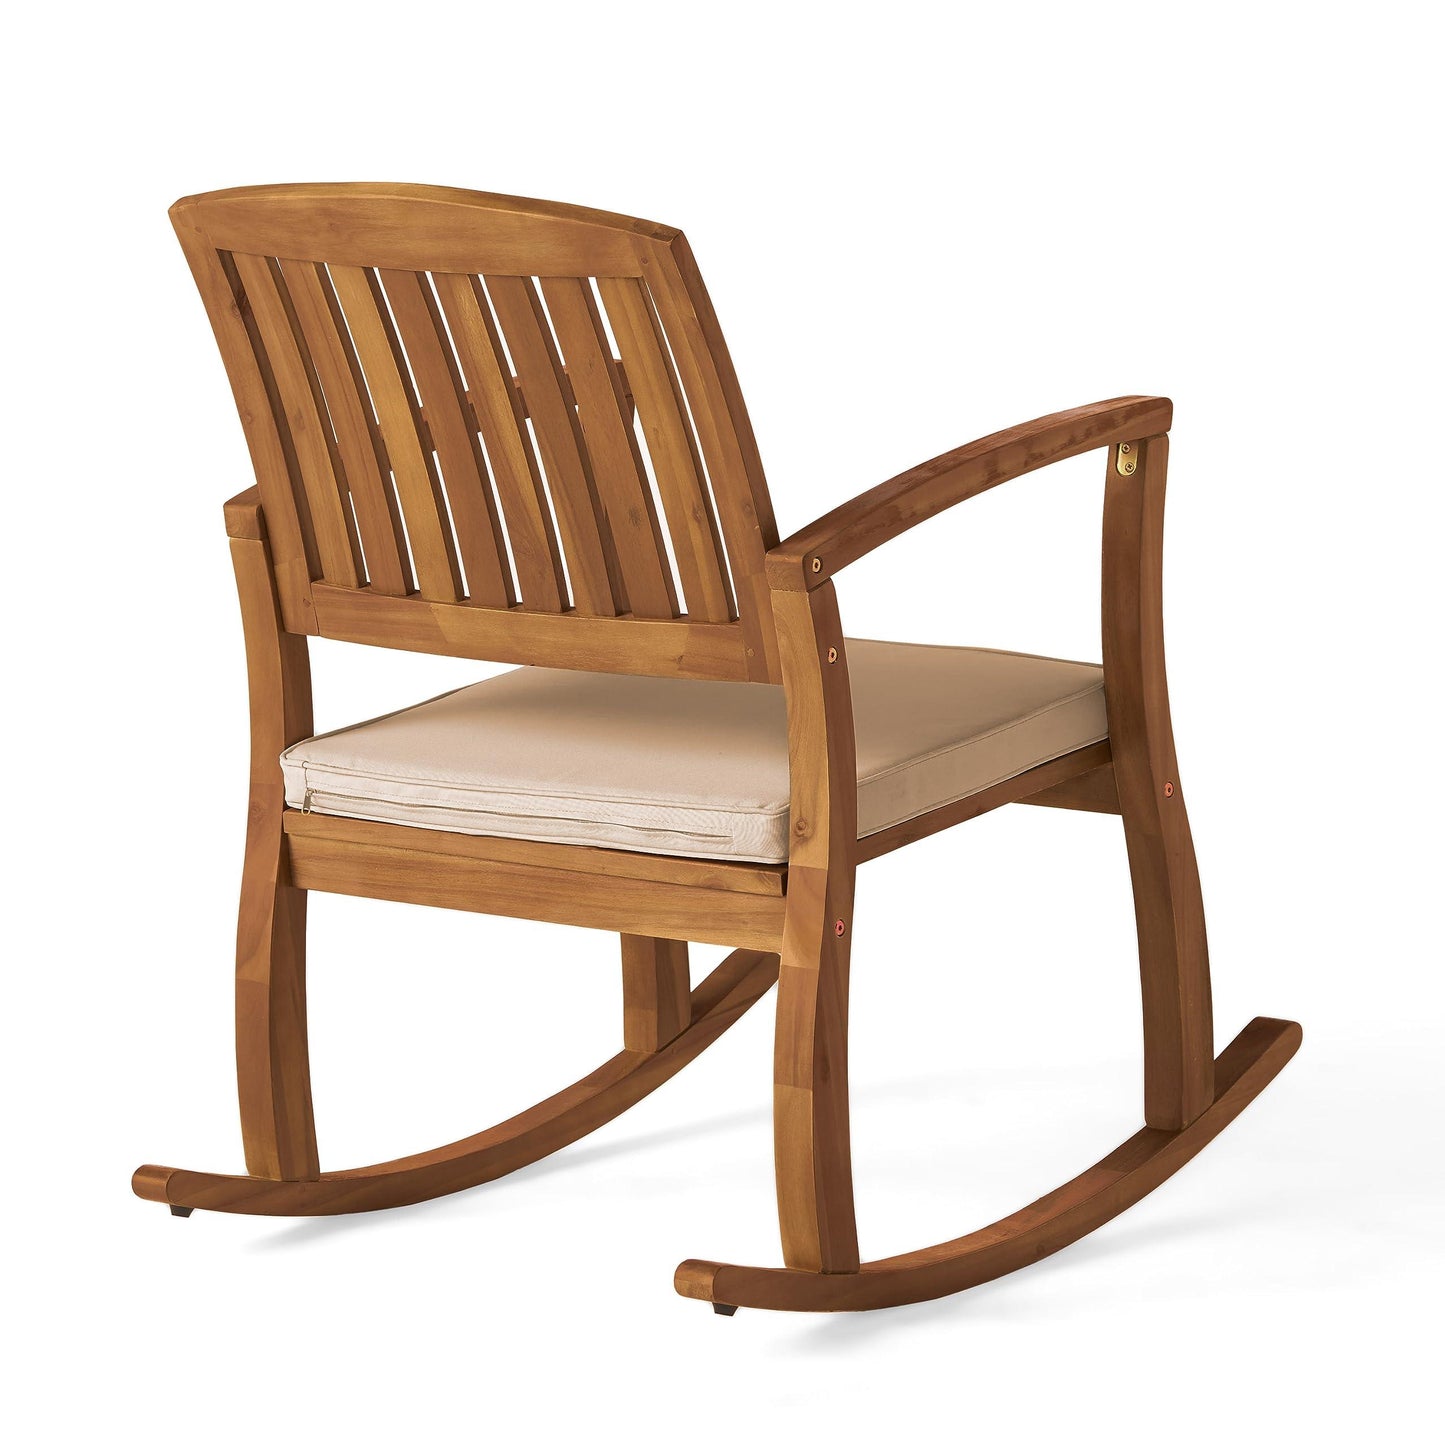 Christopher Knight Home Selma Acacia Rocking Chair with Cushion, Teak Finish - CookCave